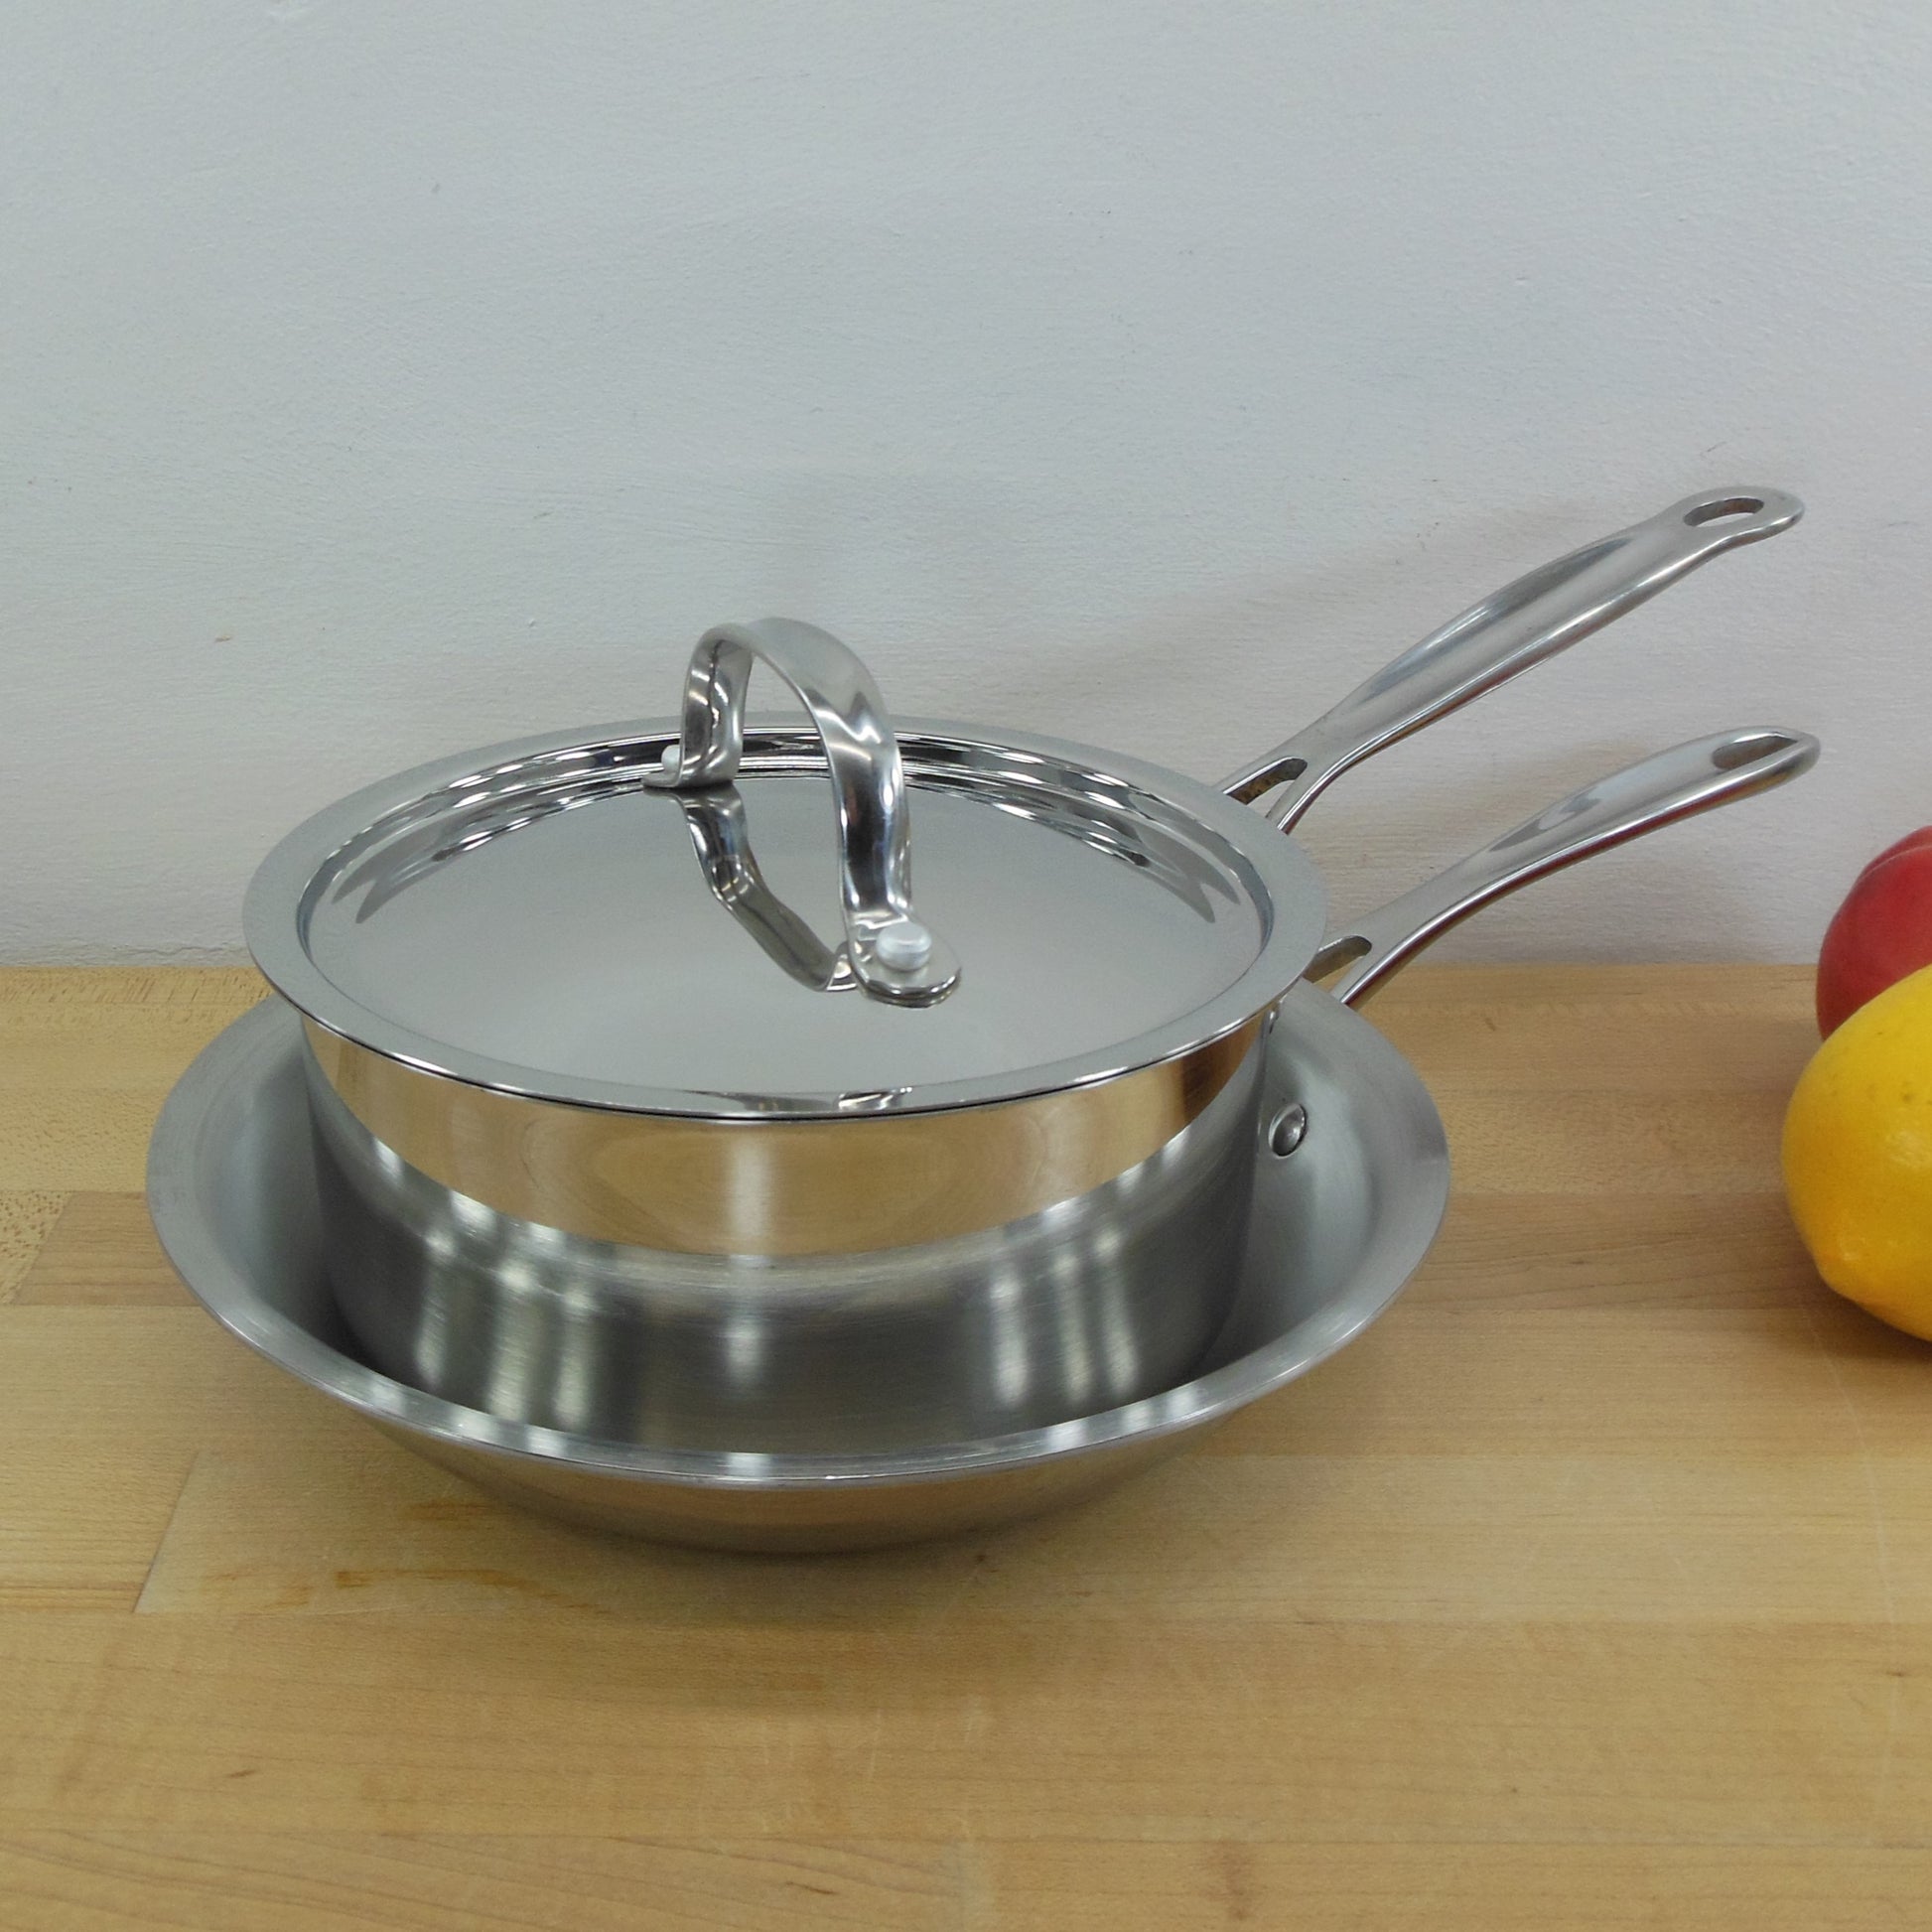 Cuisinart Stainless Steel Saucepan with Lid